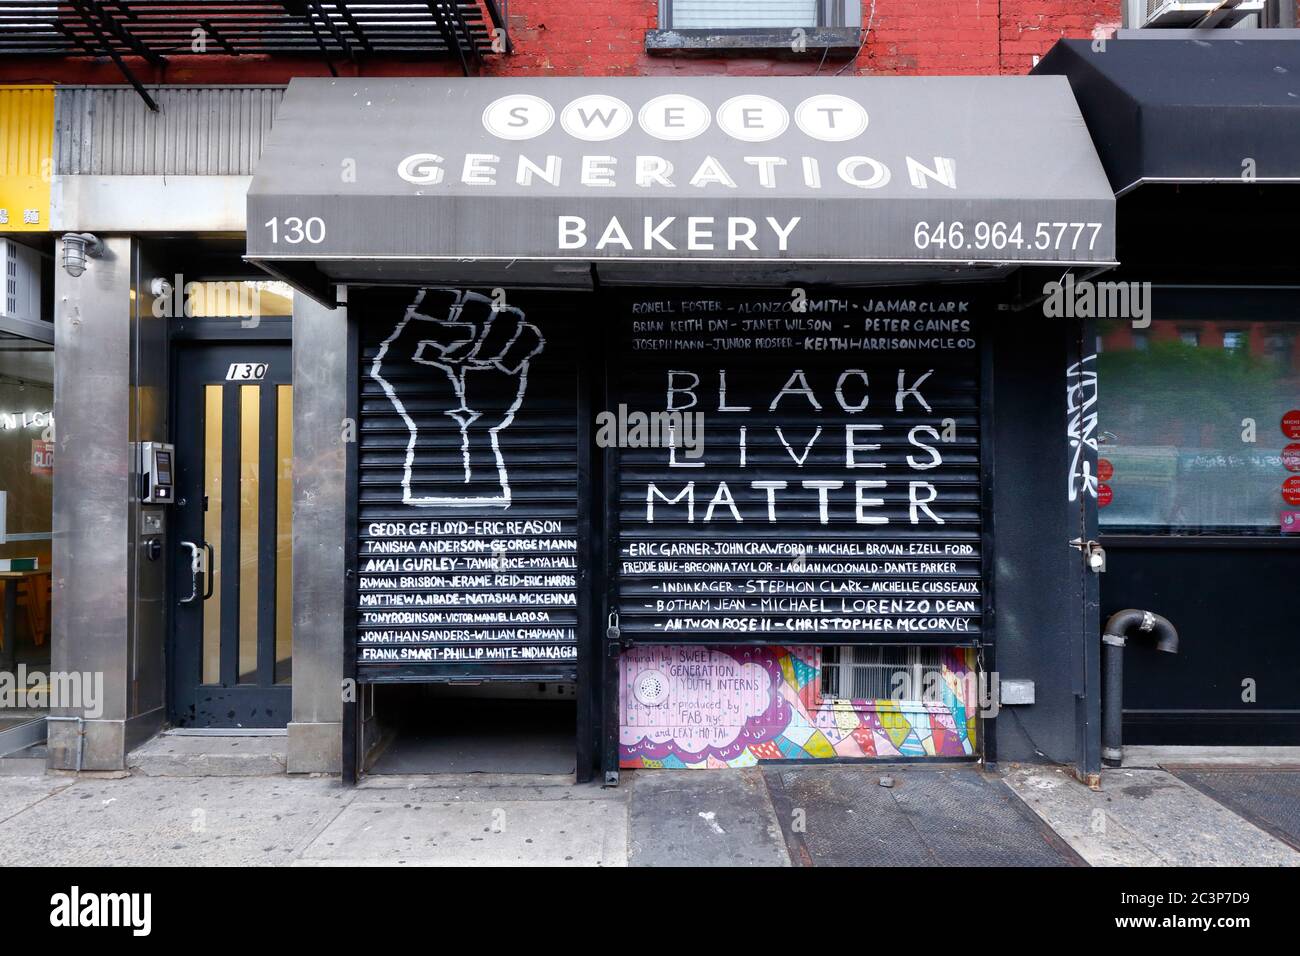 A Black Lives Matter mural painted on the roll down gate of Sweet Generation bakery in the East Village neighborhood of Manhattan in New York City Stock Photo